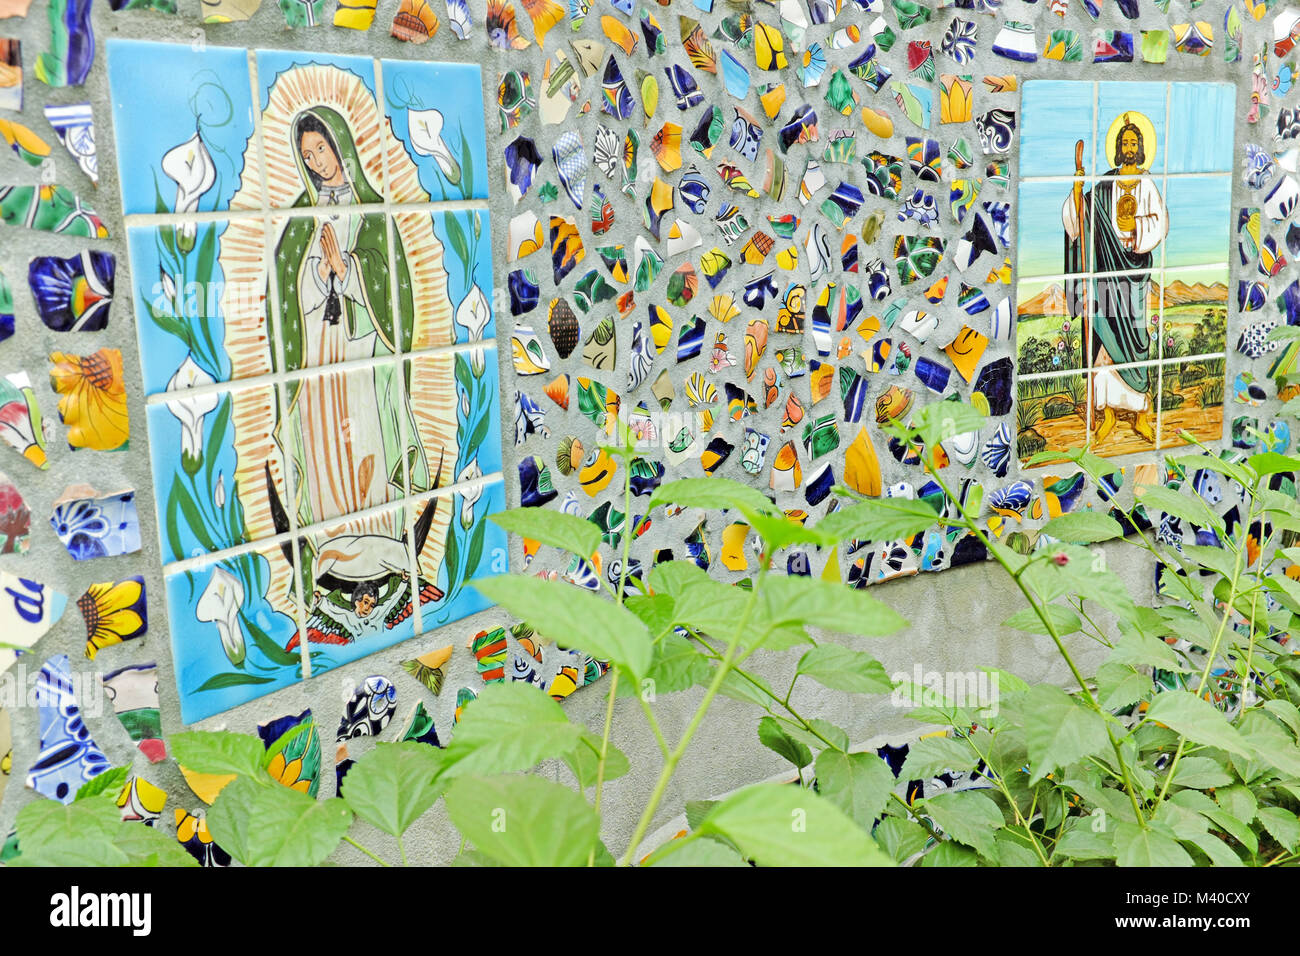 Public tile mosaic with religious icons of Jesus and Mary built into it colorful facade located on the streets of Puerto Vallarta, Mexico. Stock Photo